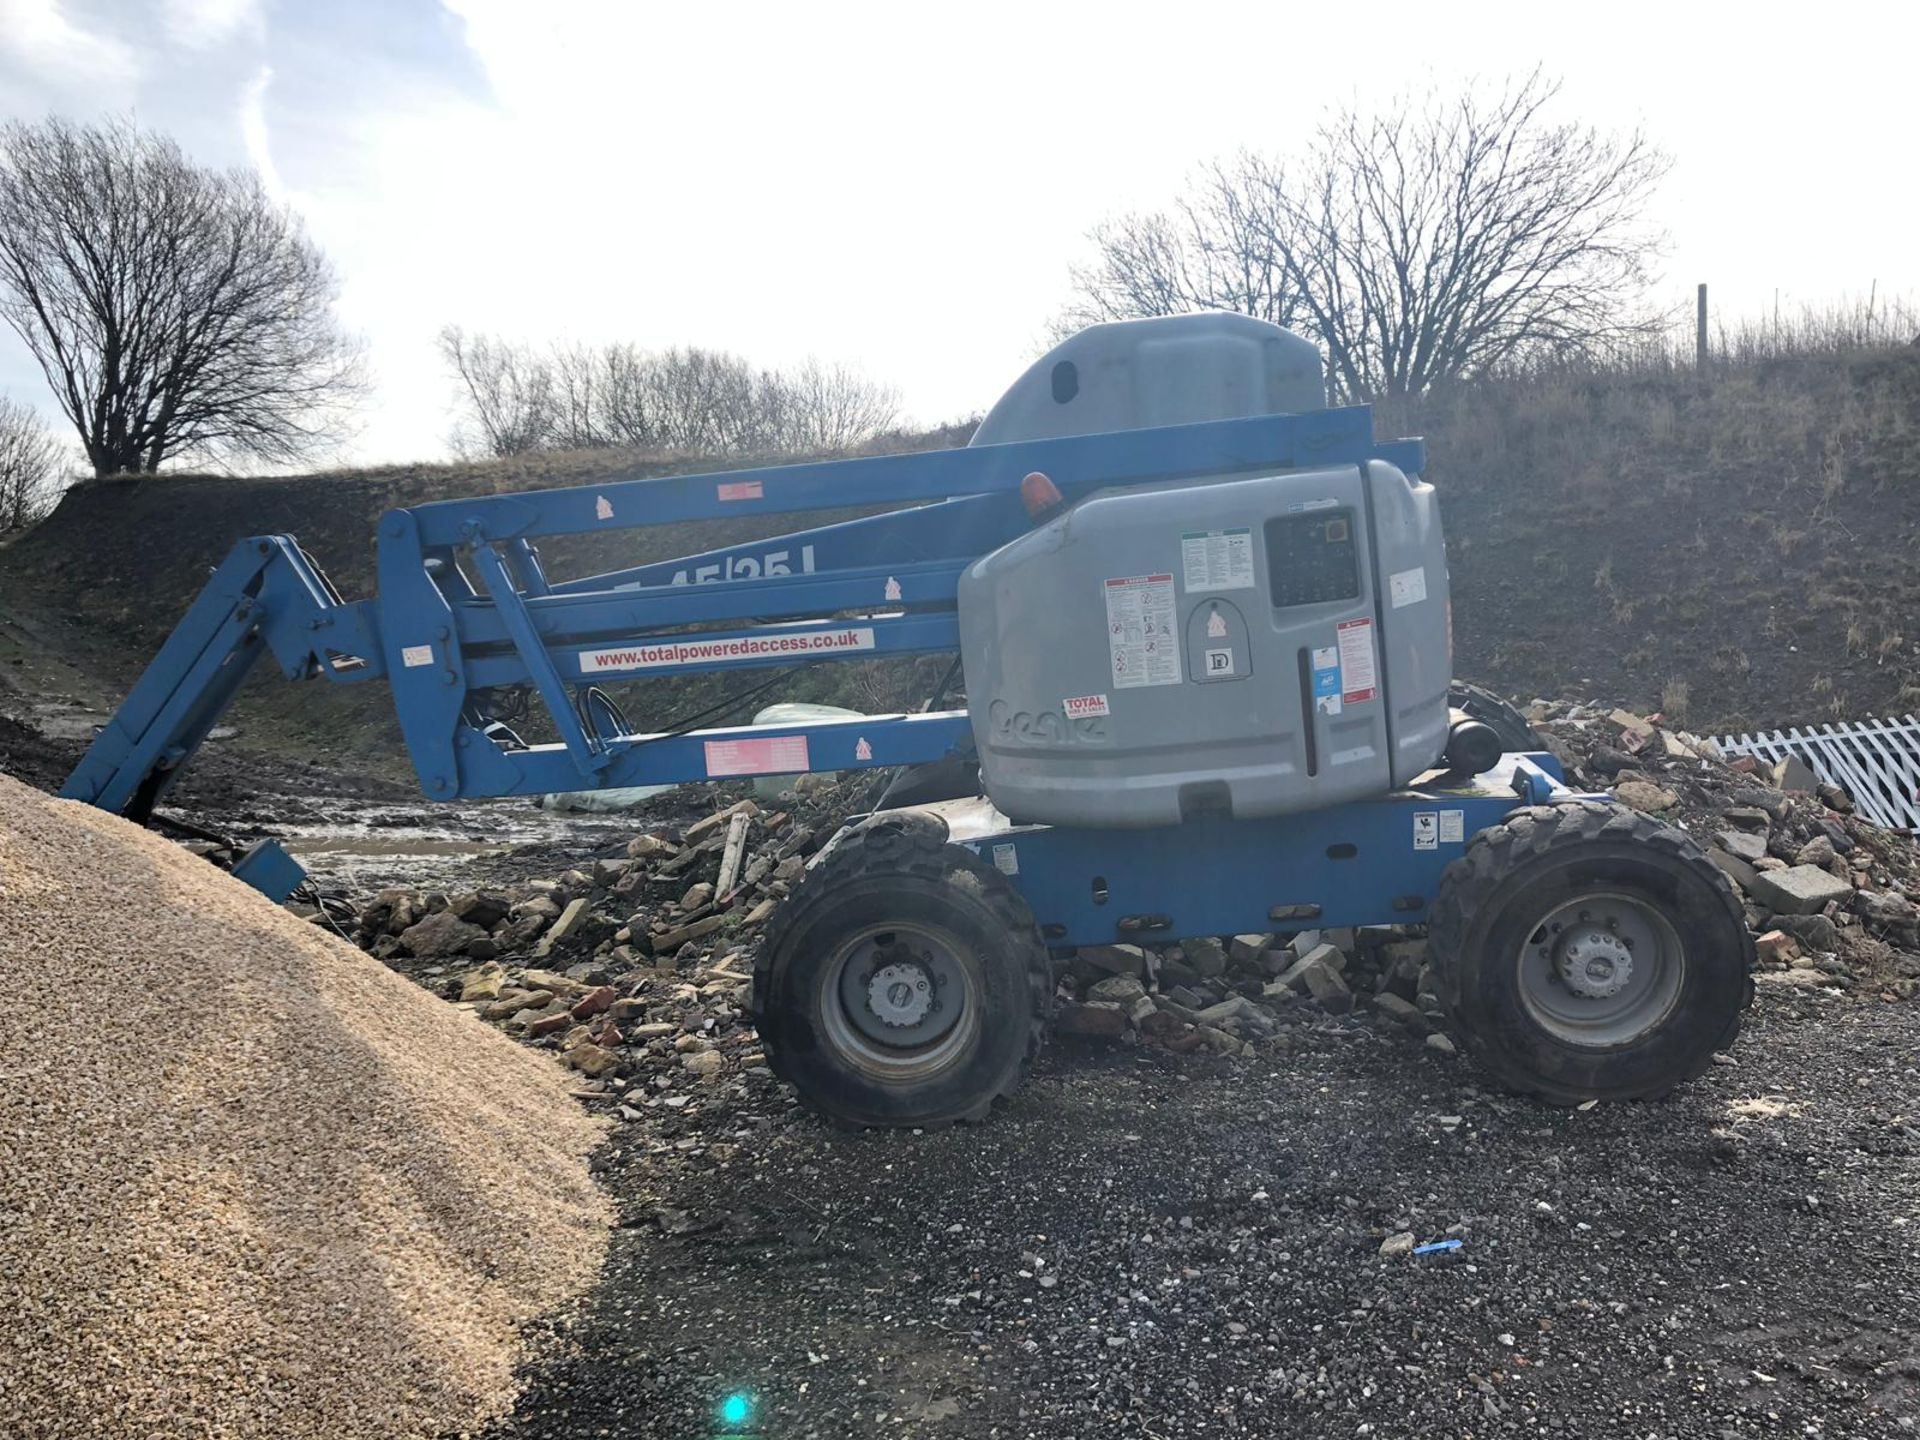 TWO 2 X GENIE BOOM LIFTS MODEL Z45 - 25J 4X4, YEAR 2001 SELLING AS SPARES / REPAIRS *PLUS VAT* - Image 2 of 8